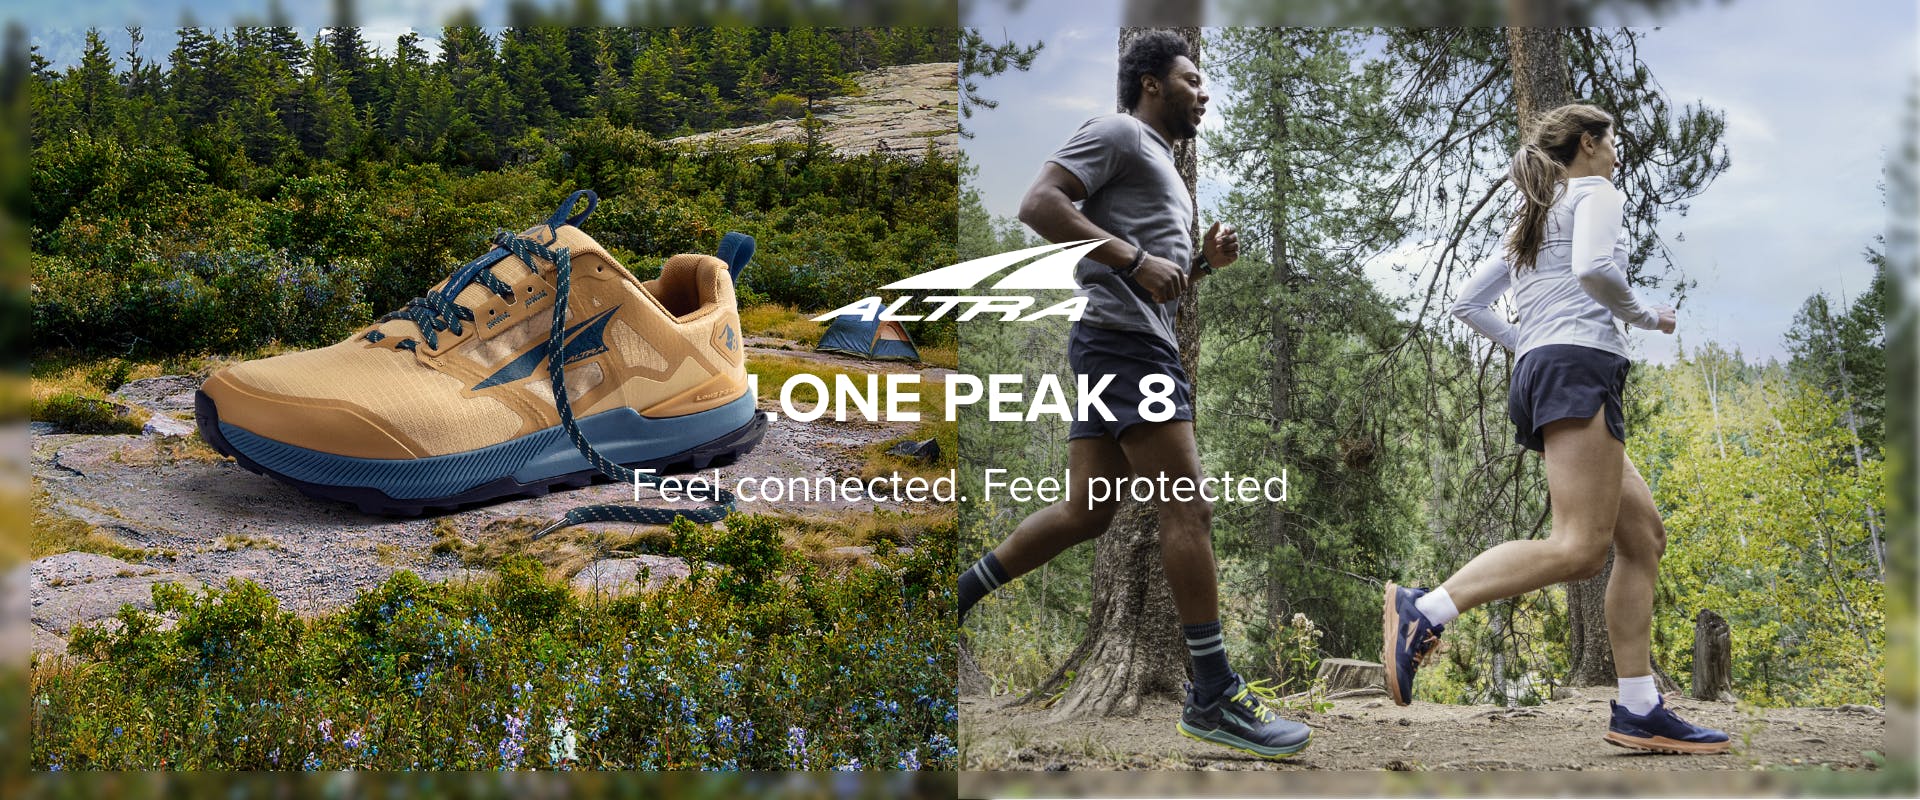 Trail Running Gear - Shoes, Clothing & Accessories